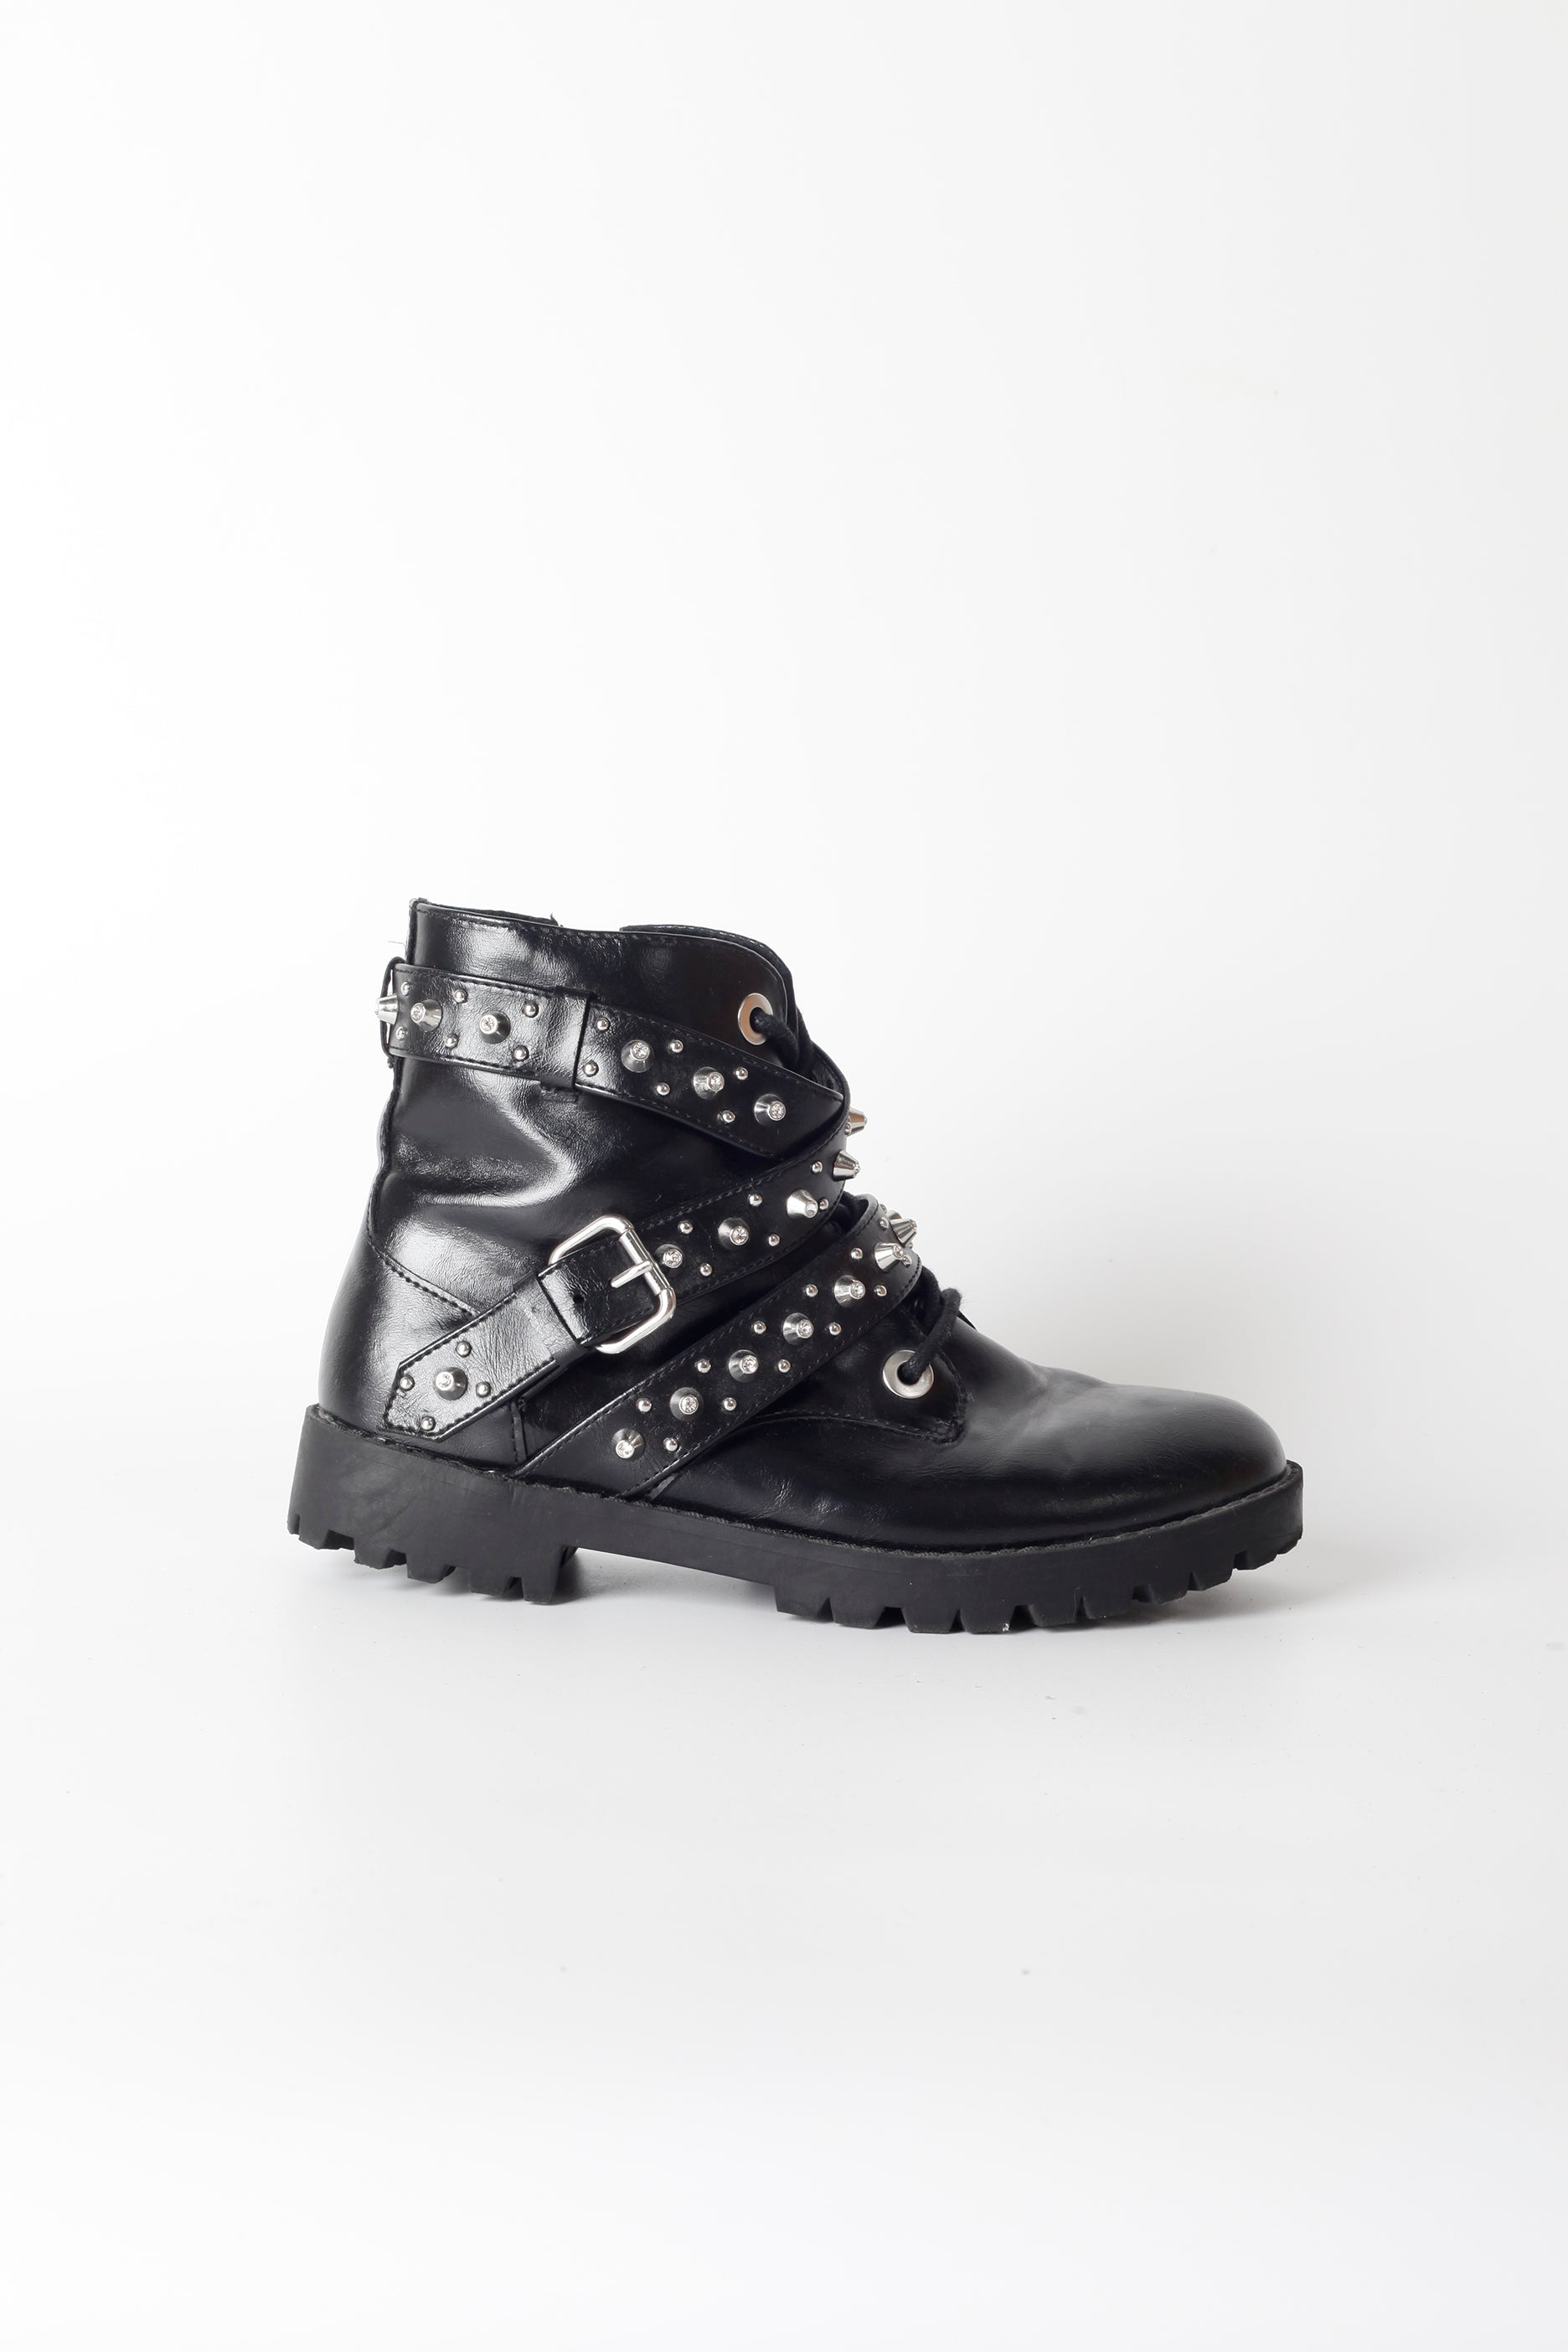 Girls Black Biker Boots with Silver Studs